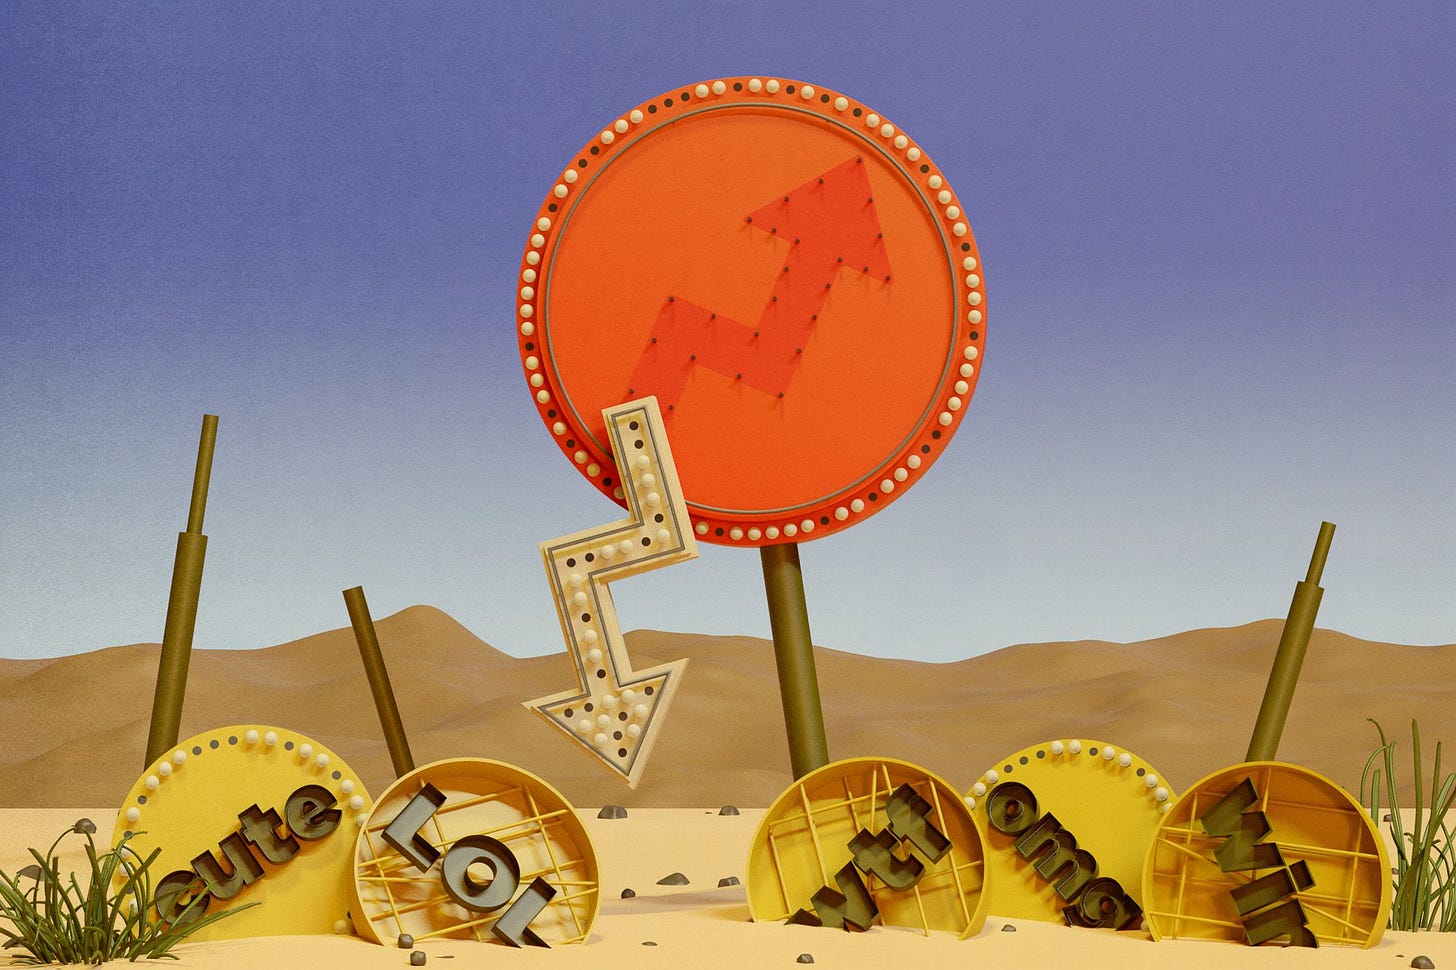 An illustration of broken carnival-style signposts being consumed by sand dunes, with broken signs reading “CUTE,” “LOL,” “wtf” and so forth lying half buried in the sand.